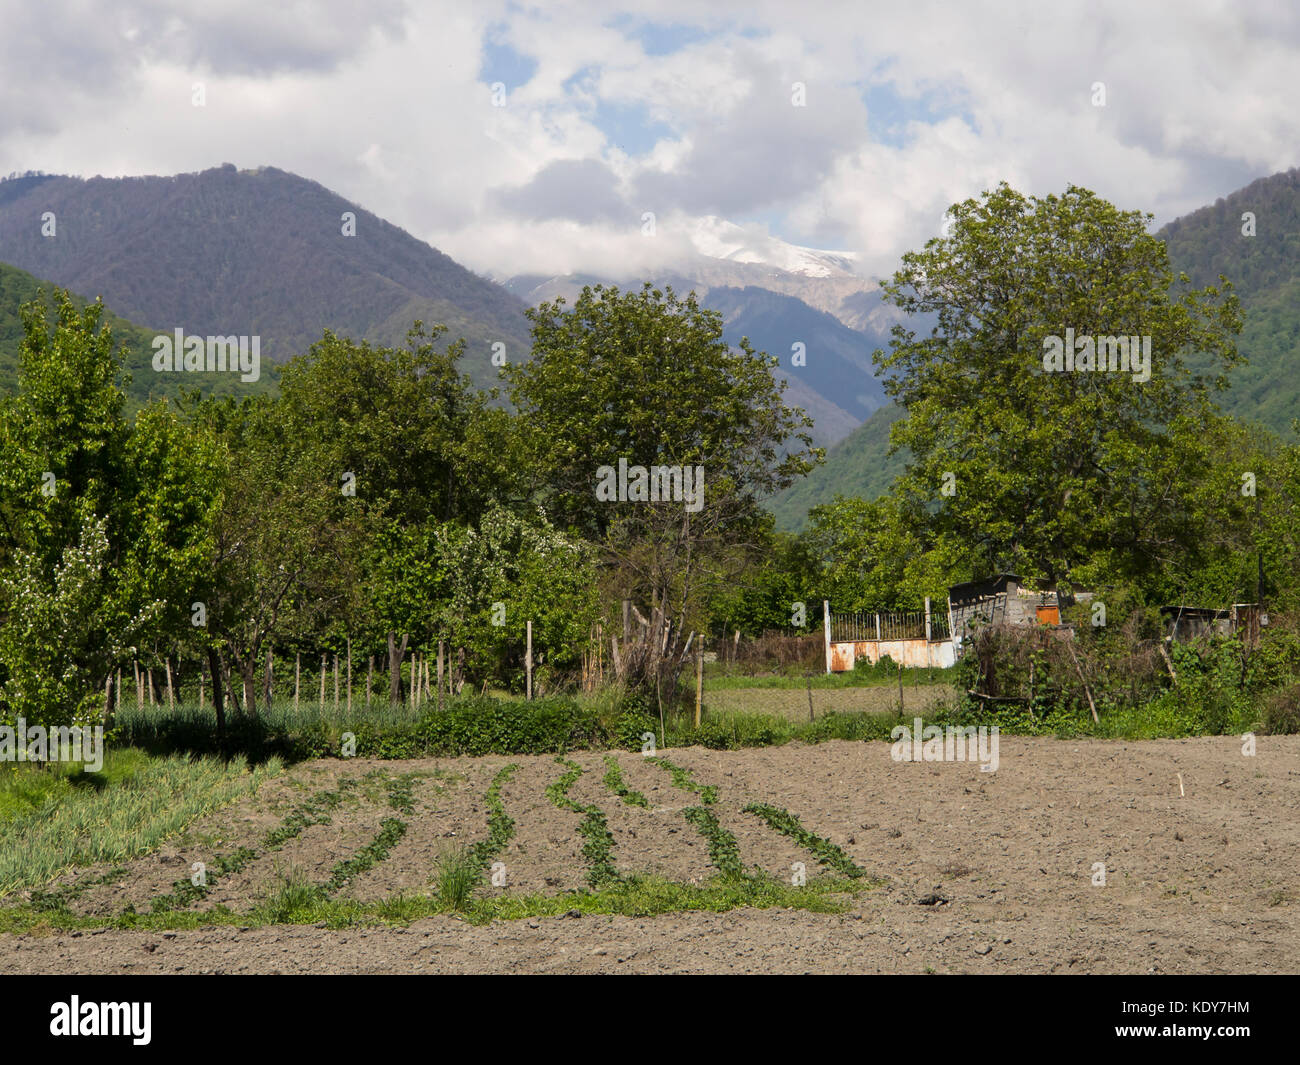 Rural landscape near Baisubani in eastern Georgia, newly planted fields in the springtime and view towards the High Caucasus mountains Stock Photo